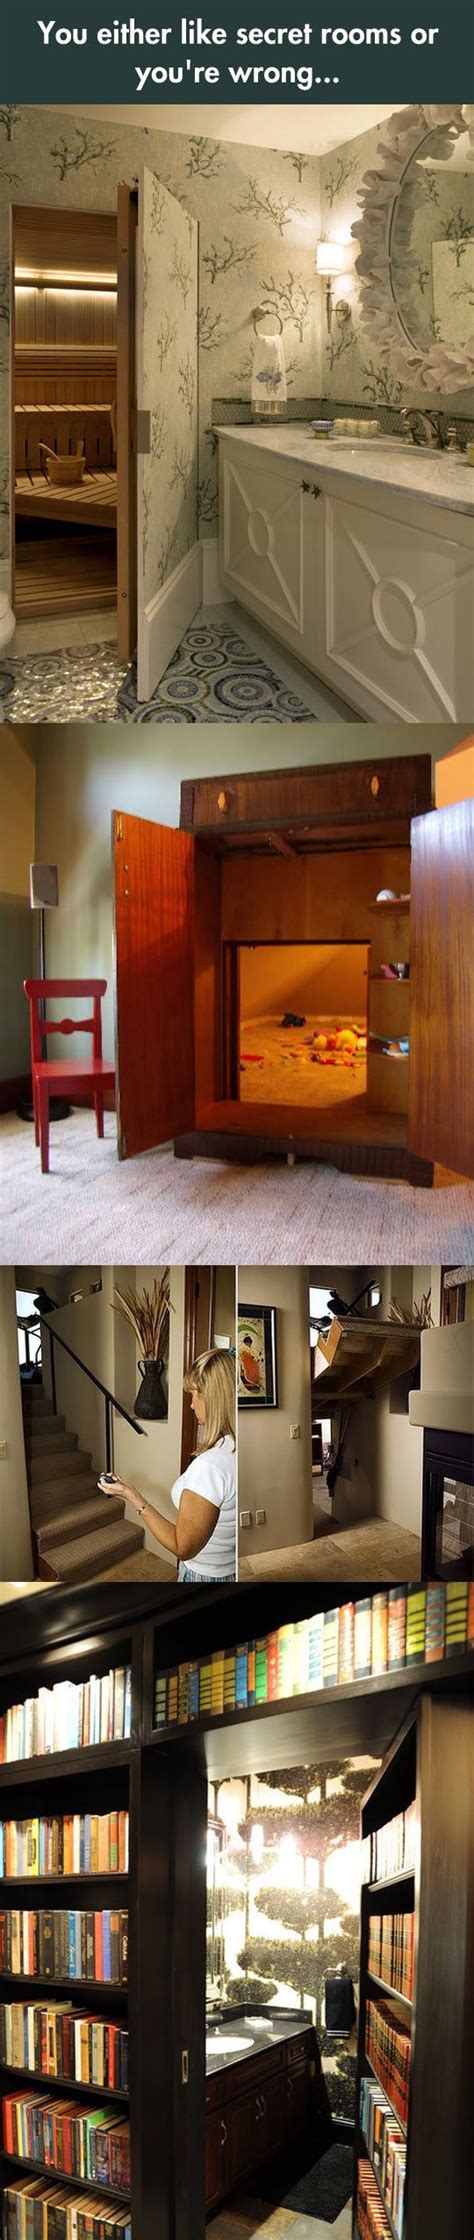 i have always wanted a secret roommmmm my house when i am older will have a secret room best